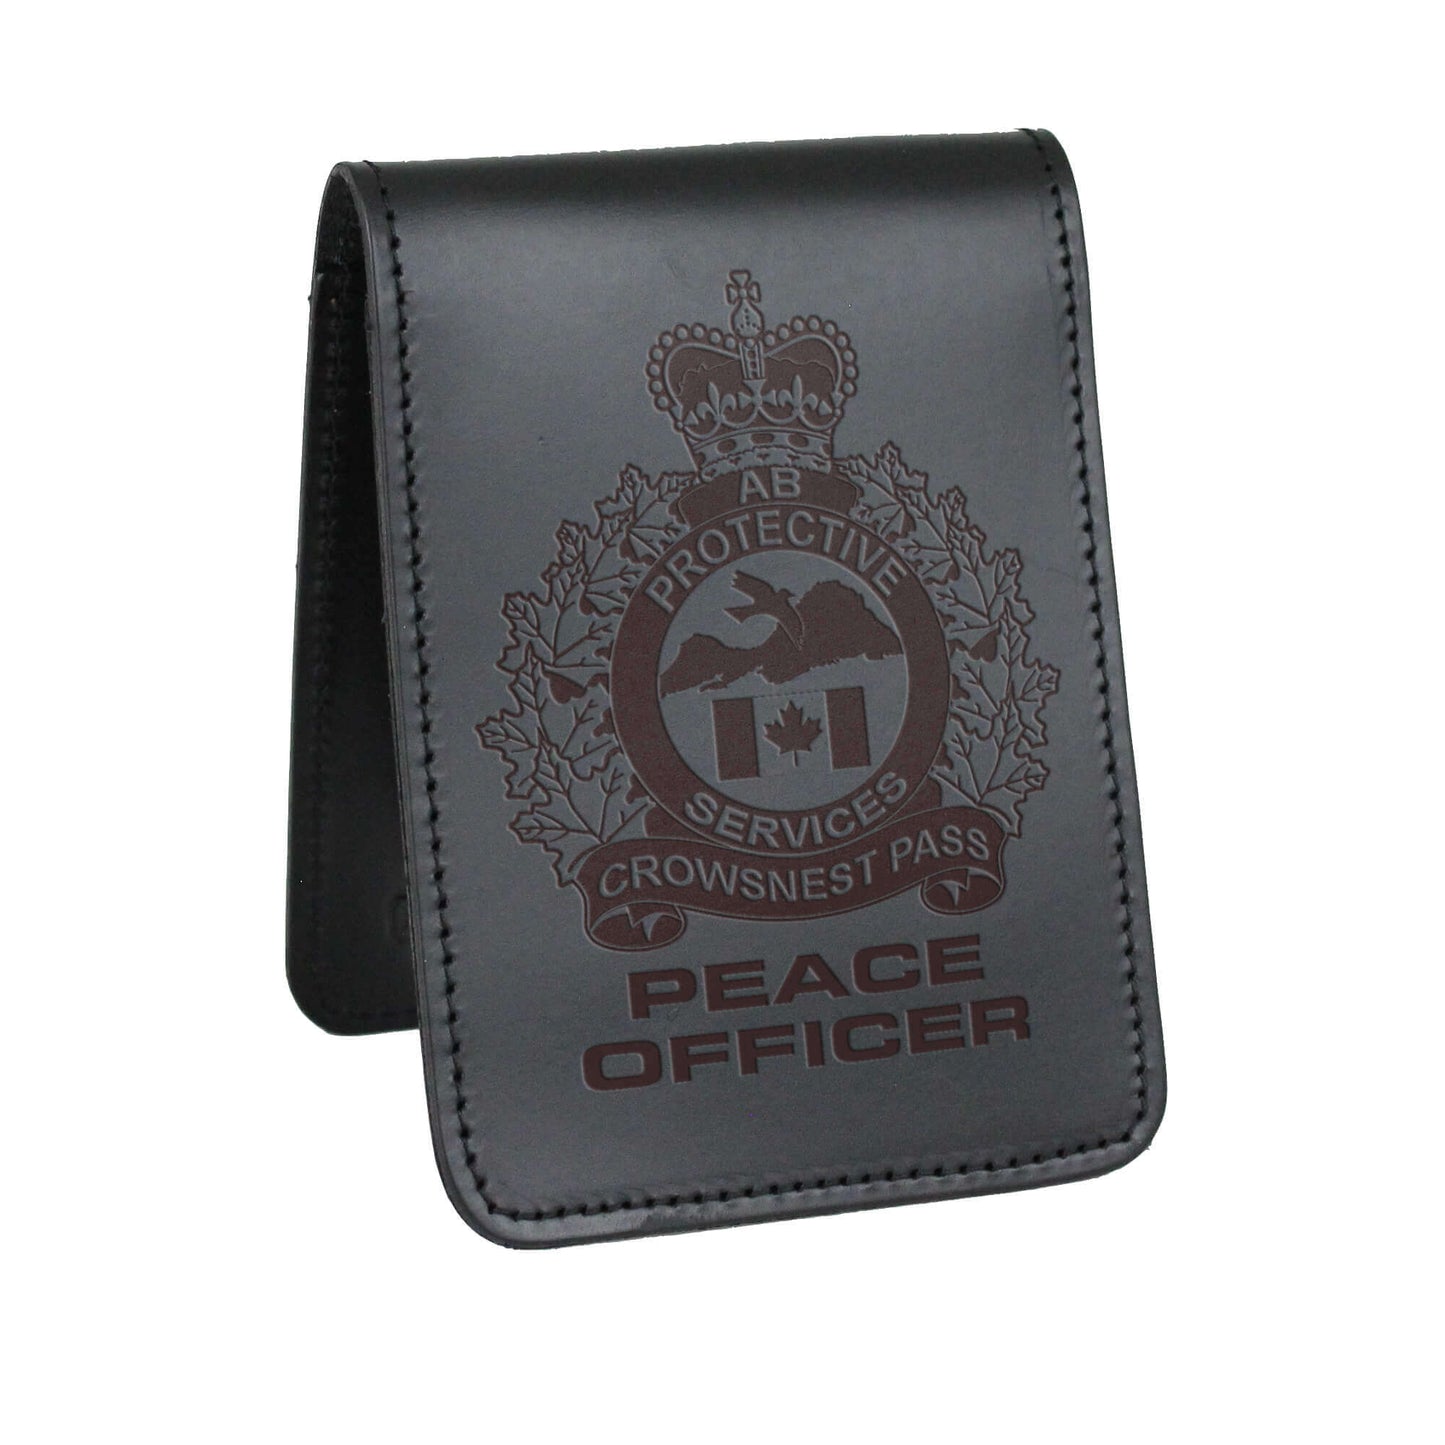 Crowsnest Pass Peace Officer Notebook Cover